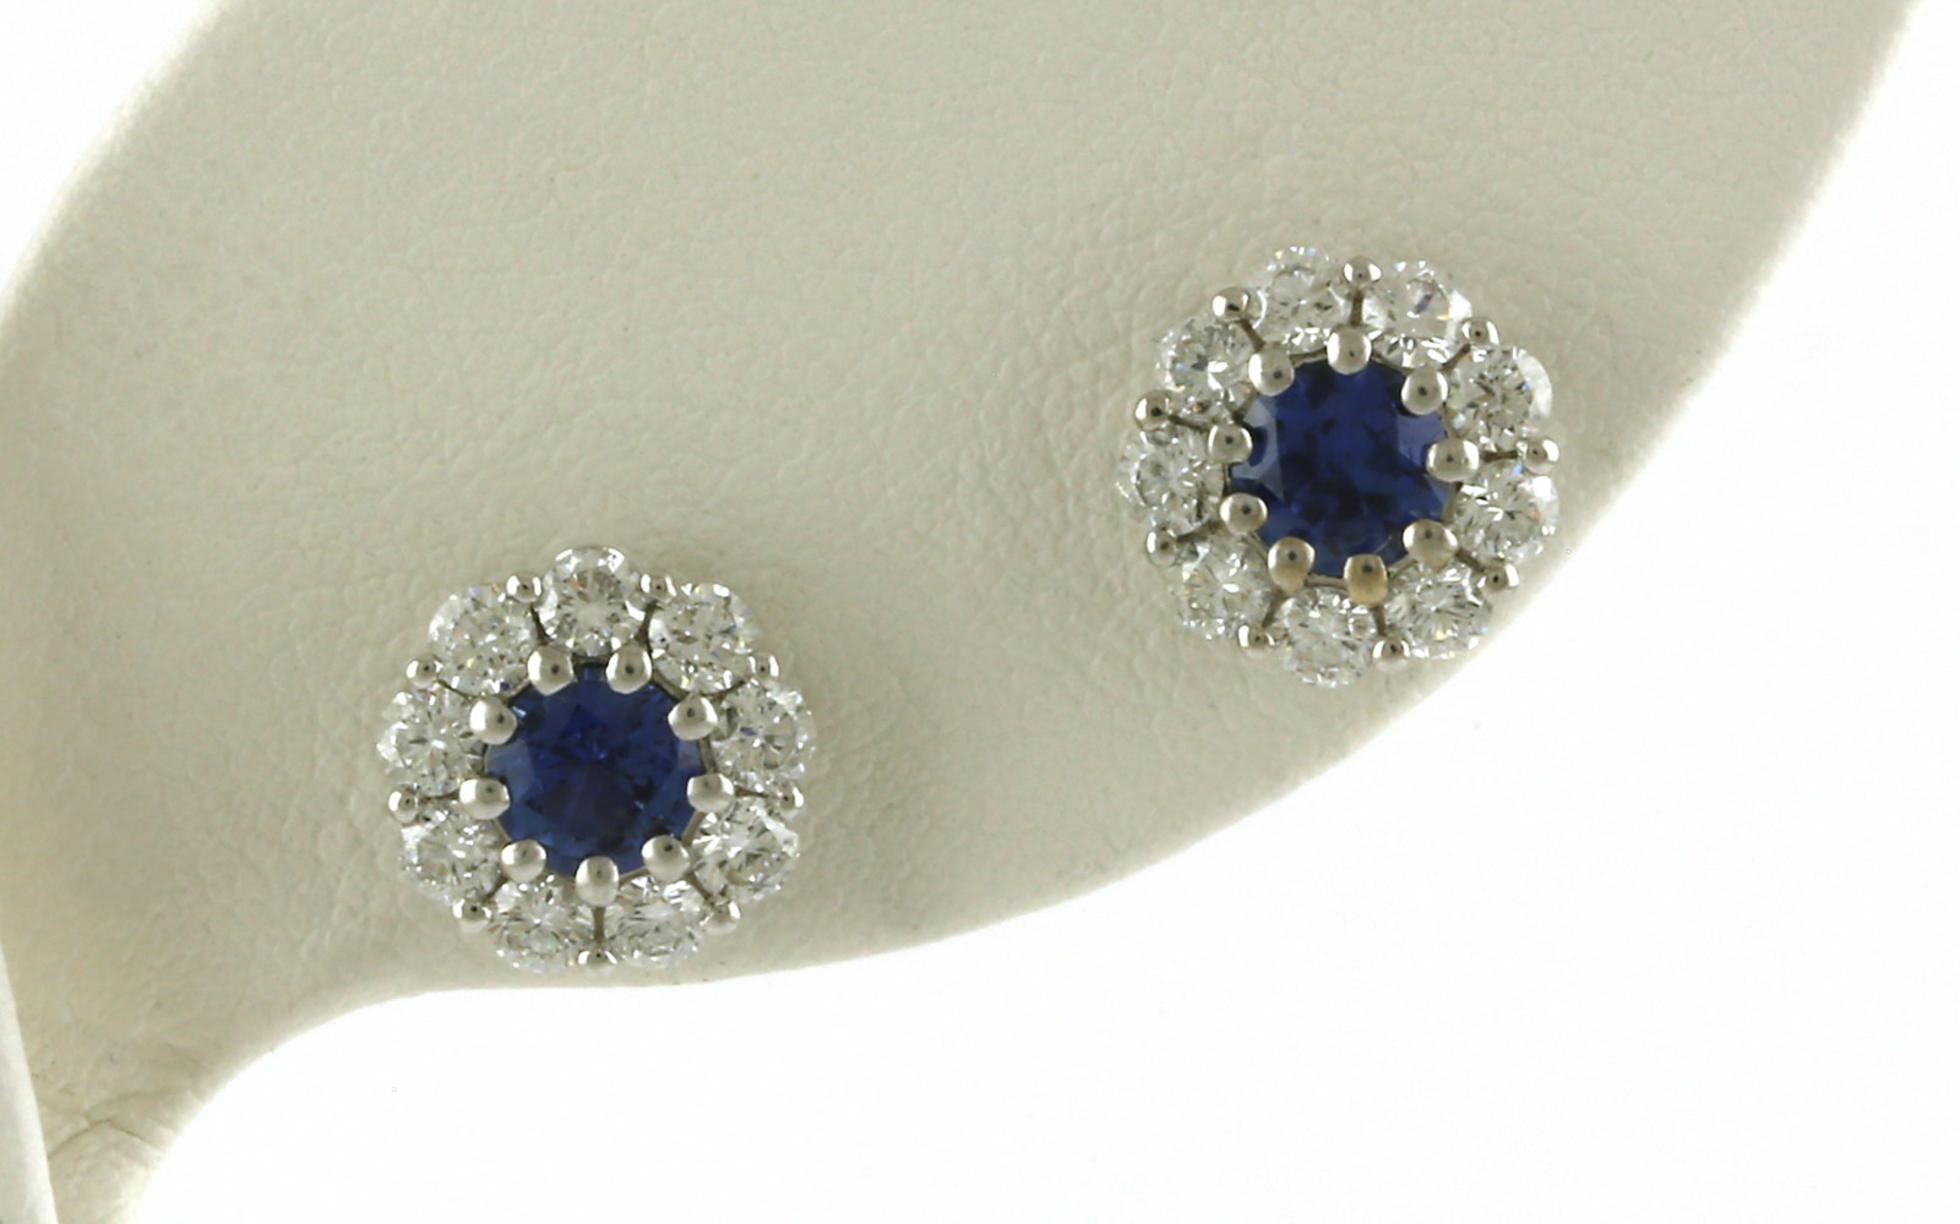 Halo-style Montana Yogo Sapphire and Diamond Stud Earrings in White Gold (0.87cts TWT)